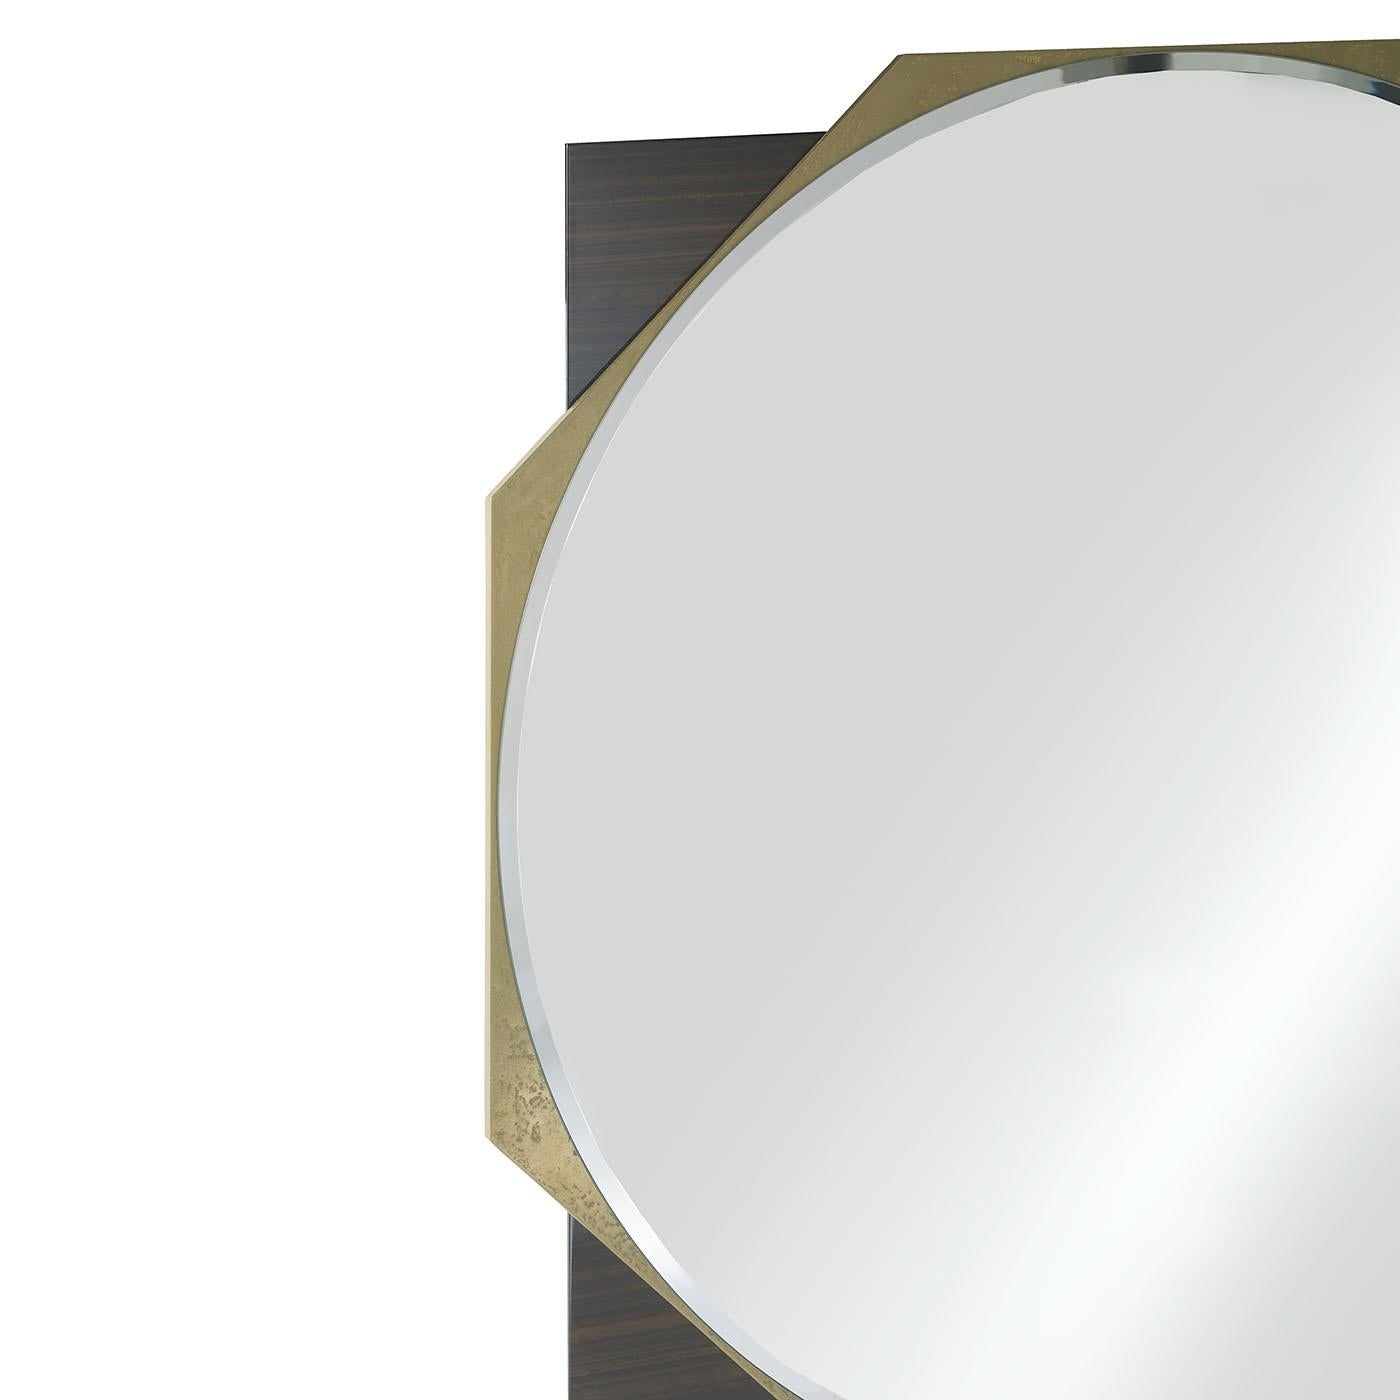 Geometric profiles dynamically overlapped define the unmistakably modern charm of this mirror. A prized eucalyptus frame - offered in a superb glossy finish - features a contrasting octagonal element accented with bronzed metal that welcomes the